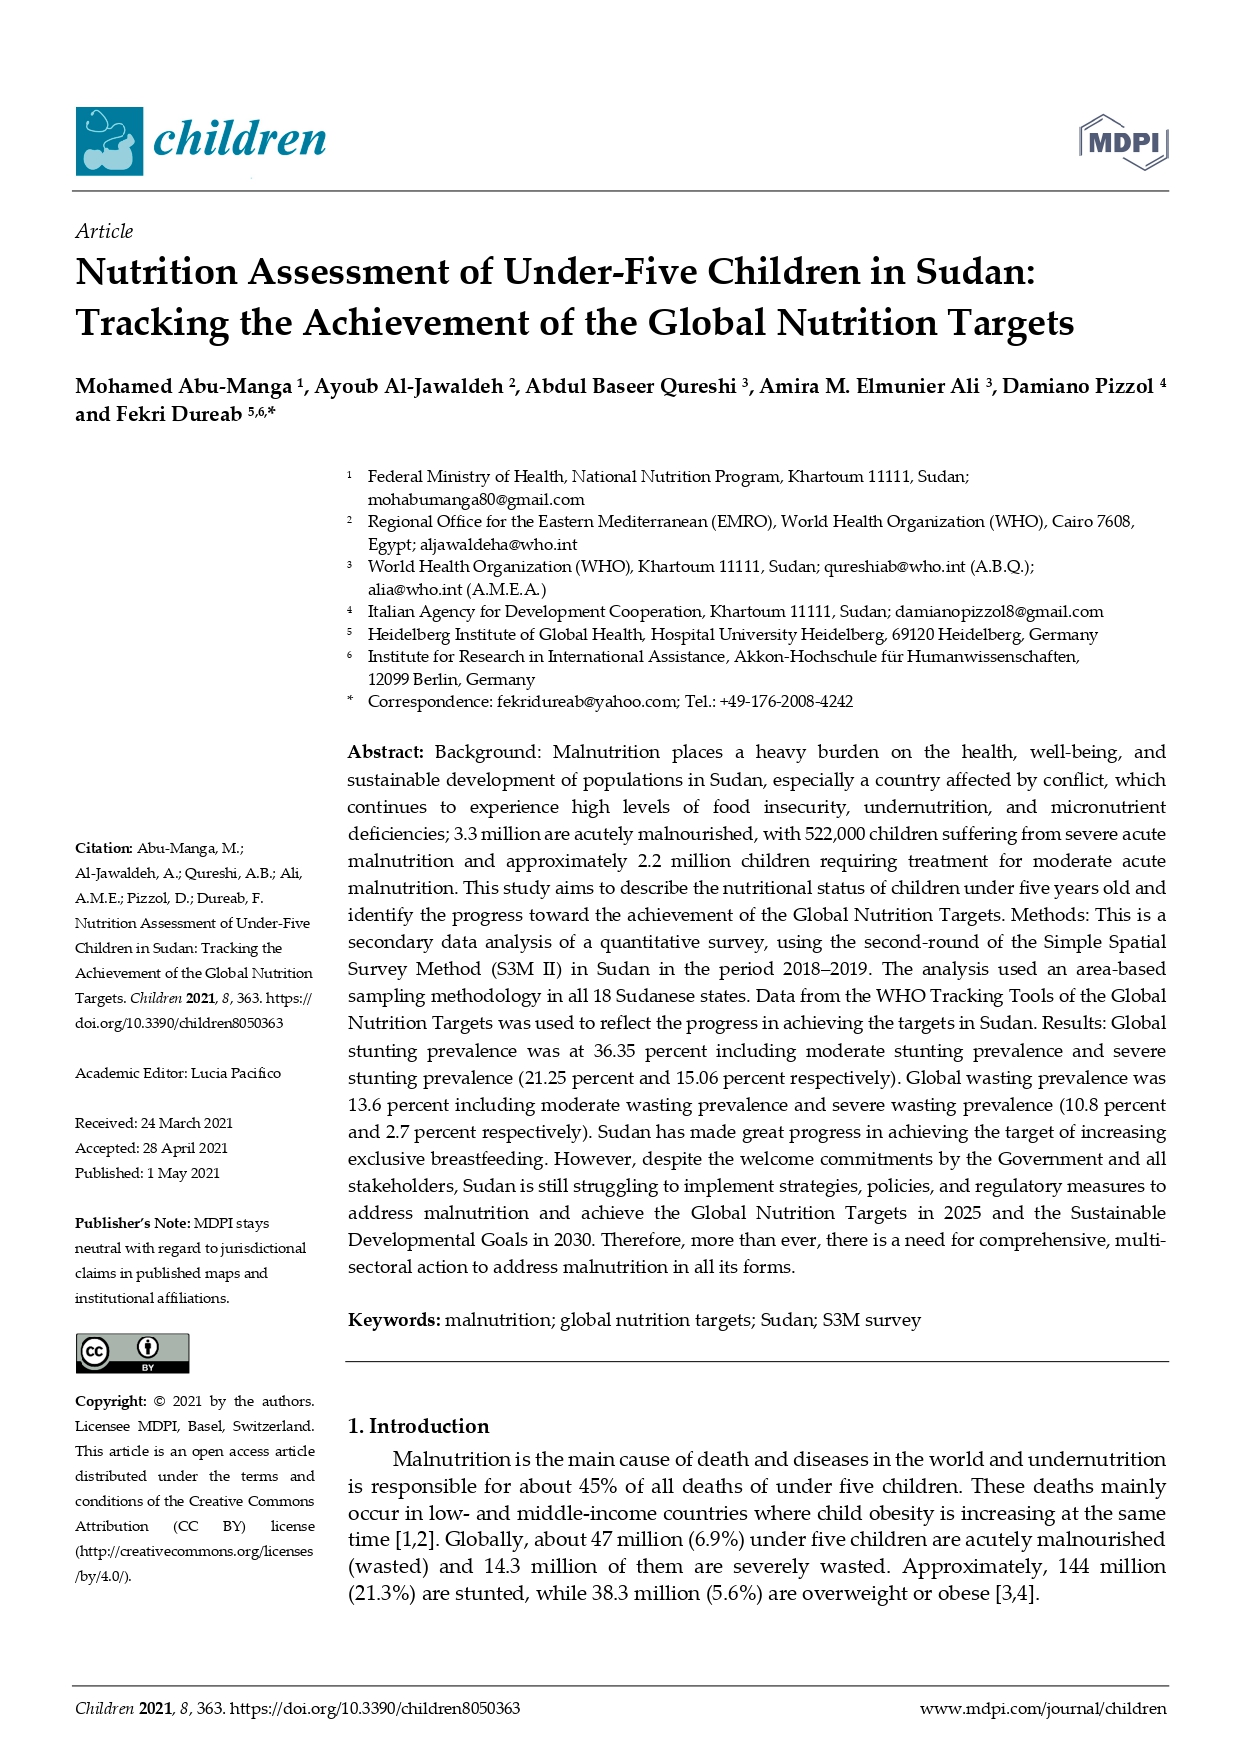 nutrition_assessment_of_under_five_children_in_sudan_tracking_the_achievement_of_the_global_nutrition_targets